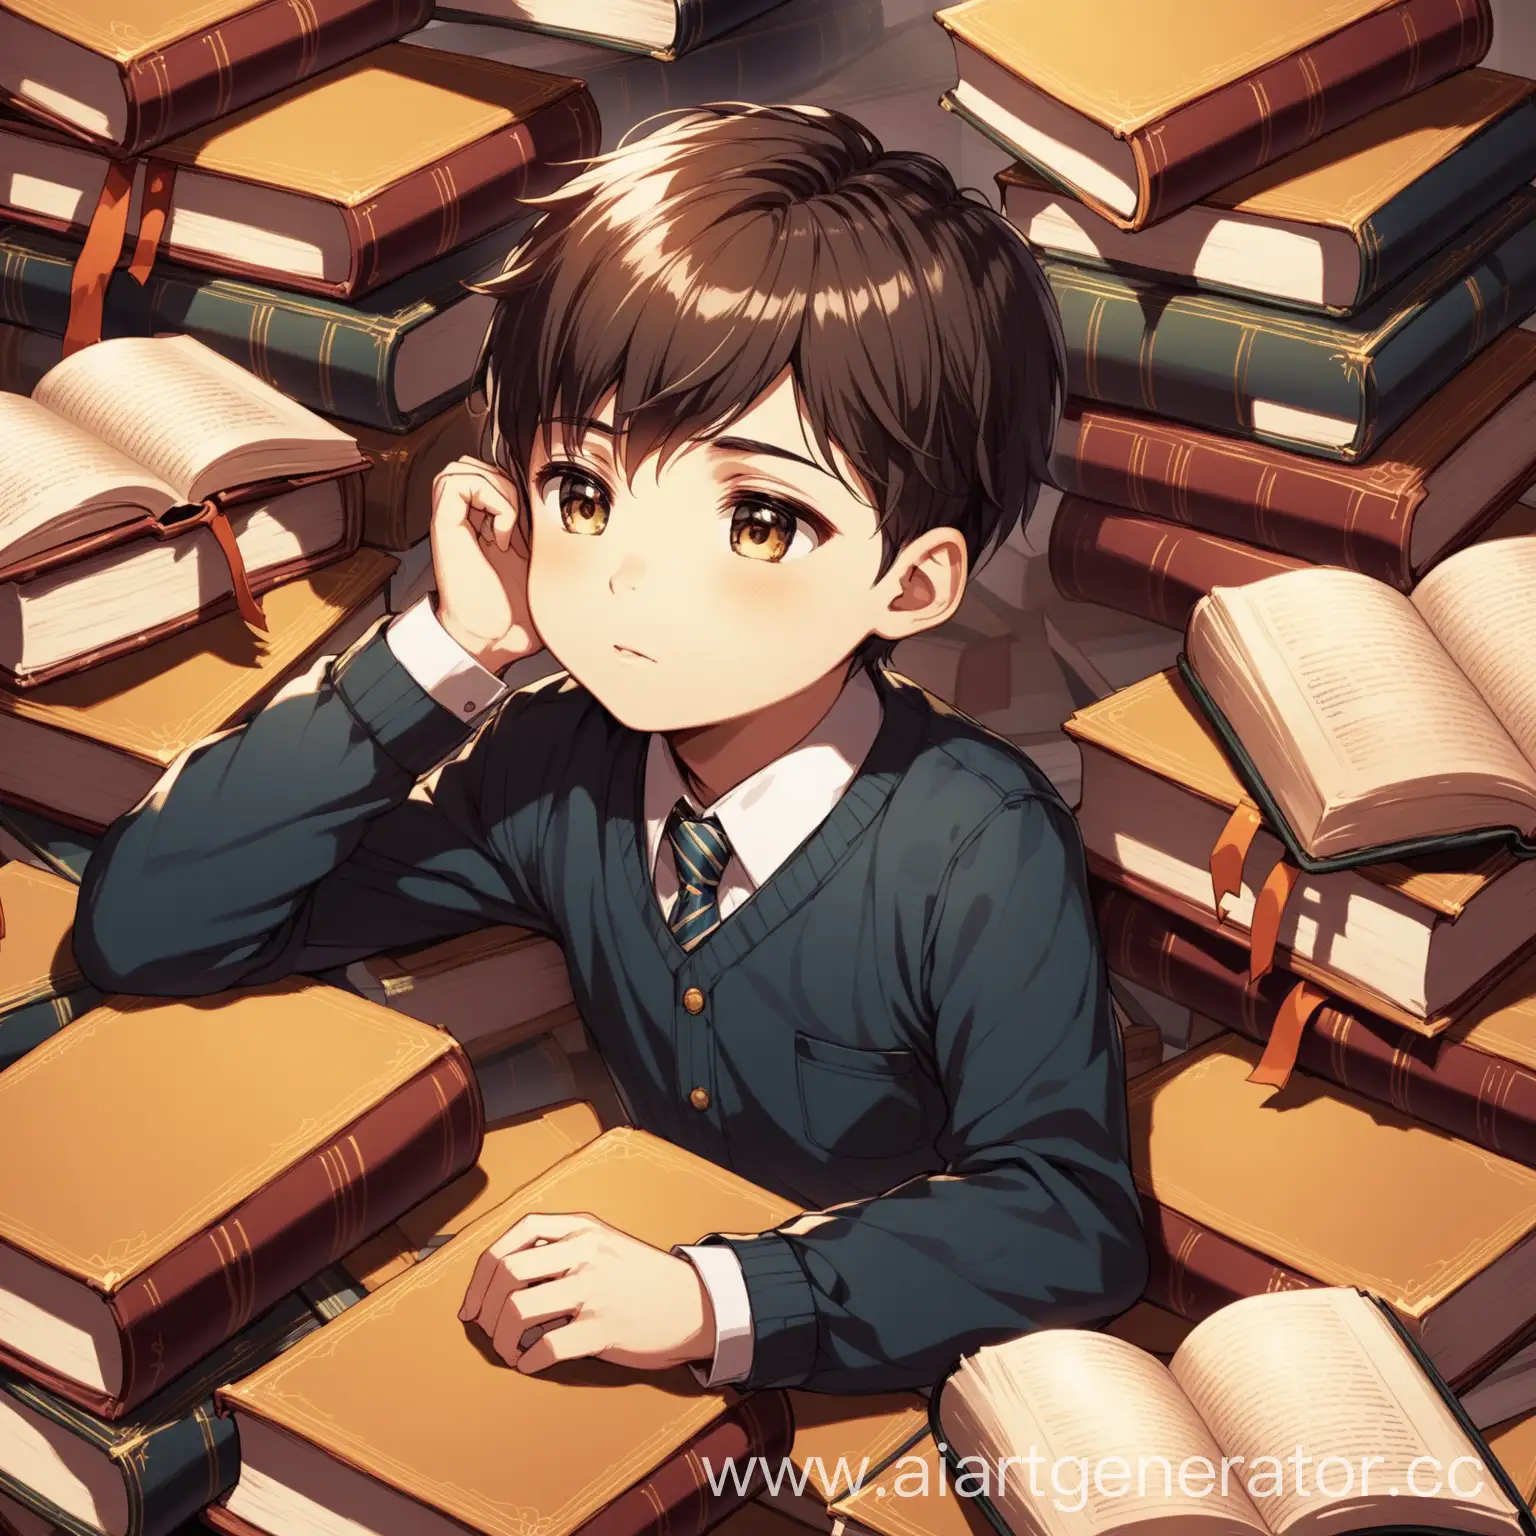 Contemplative-Boy-Immersed-in-Reading-Books